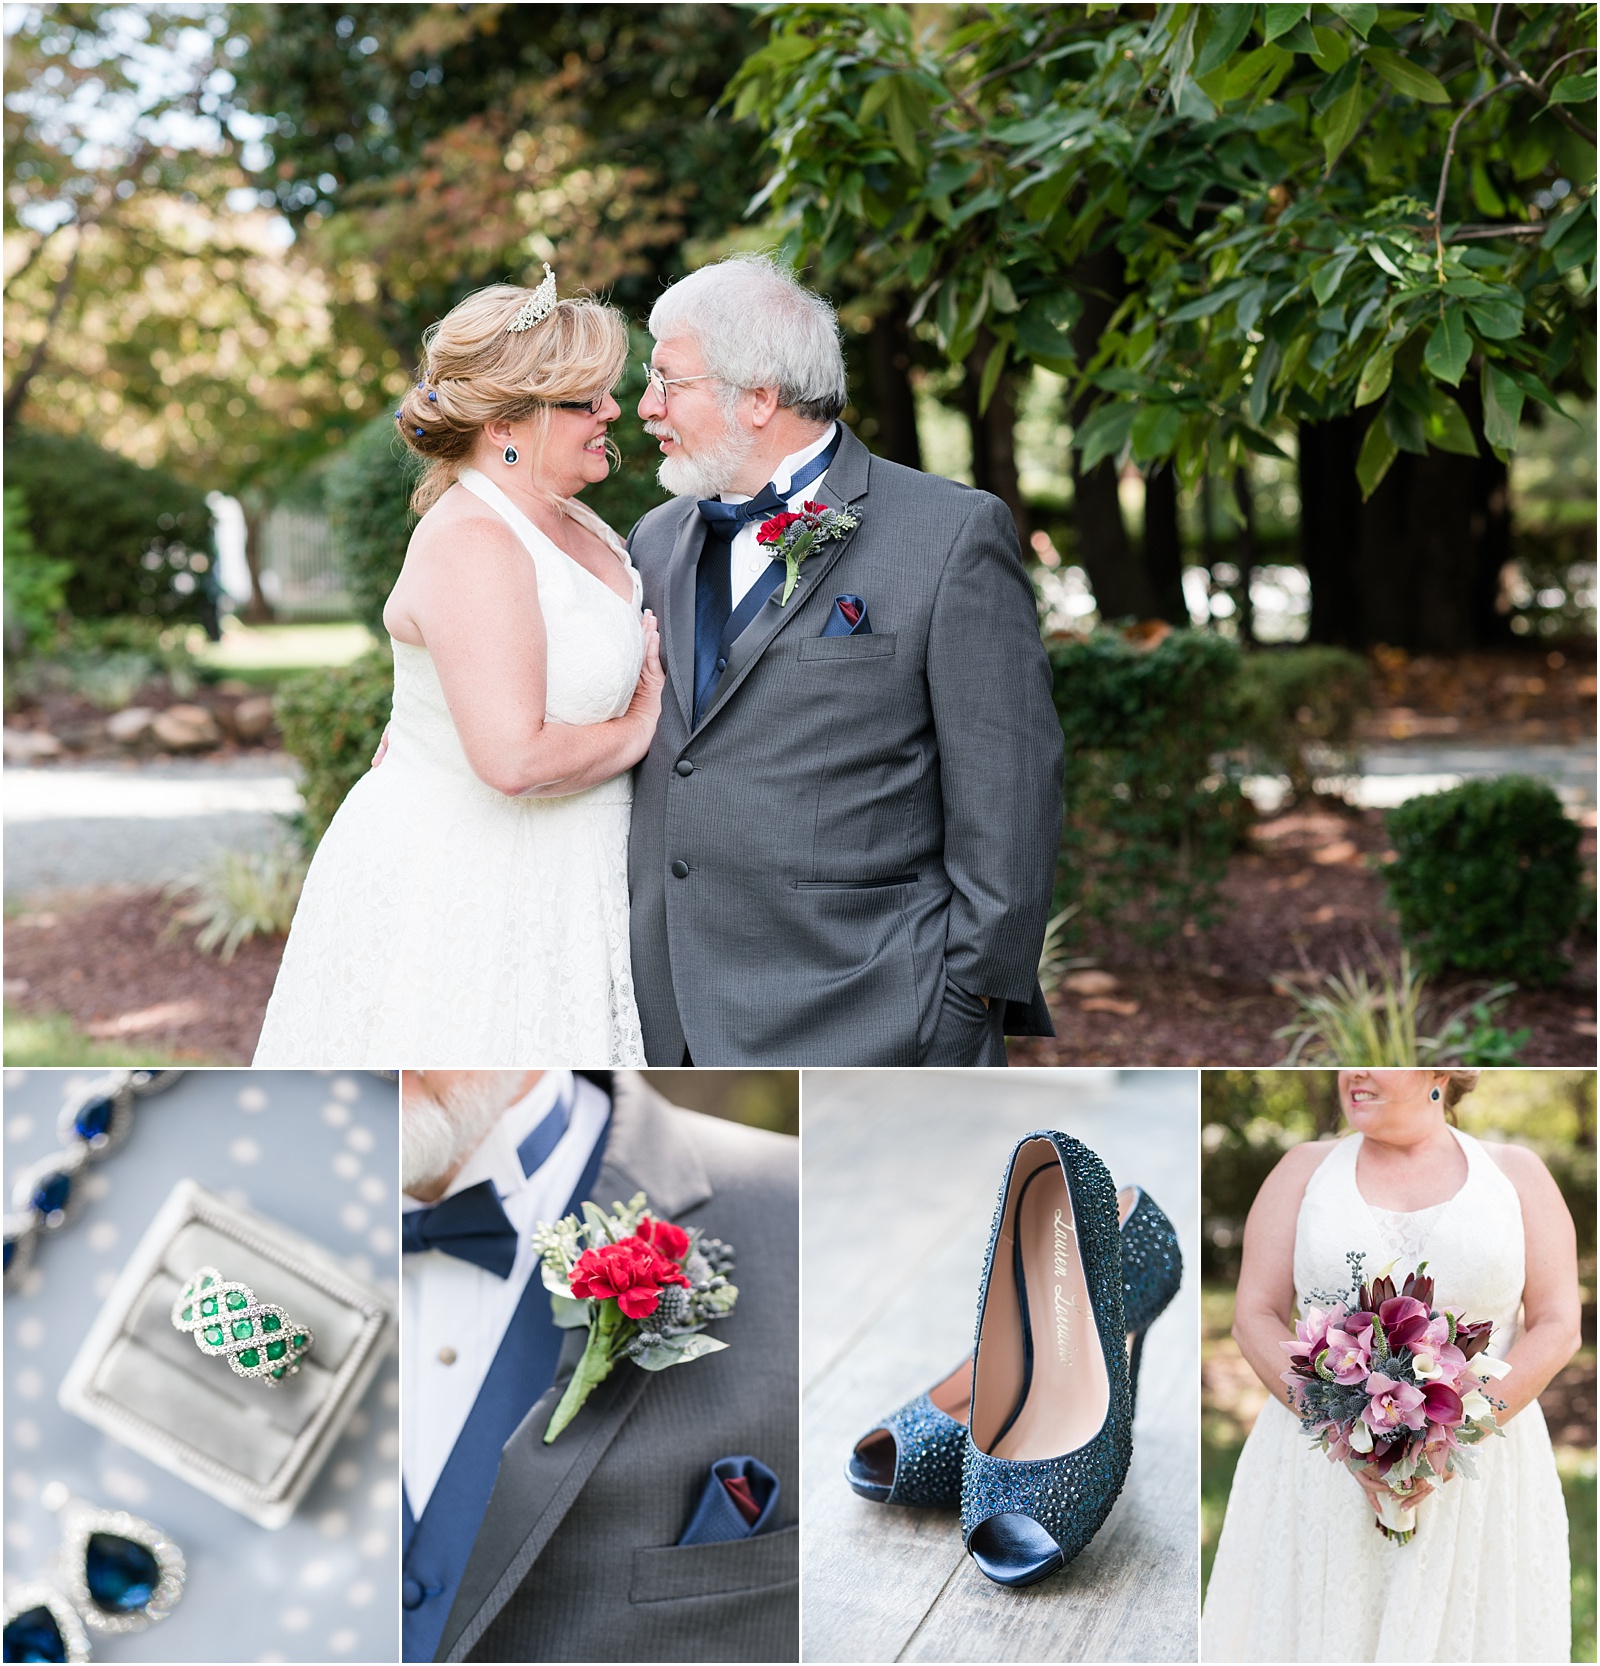 Michelle and Sara Photography, Michelle and Sara weddings, michelle robinson photography, burke manor inn, fall wedding, red and purple floral, navy blue details, green gem engagement ring, navy blue suit, grey suit